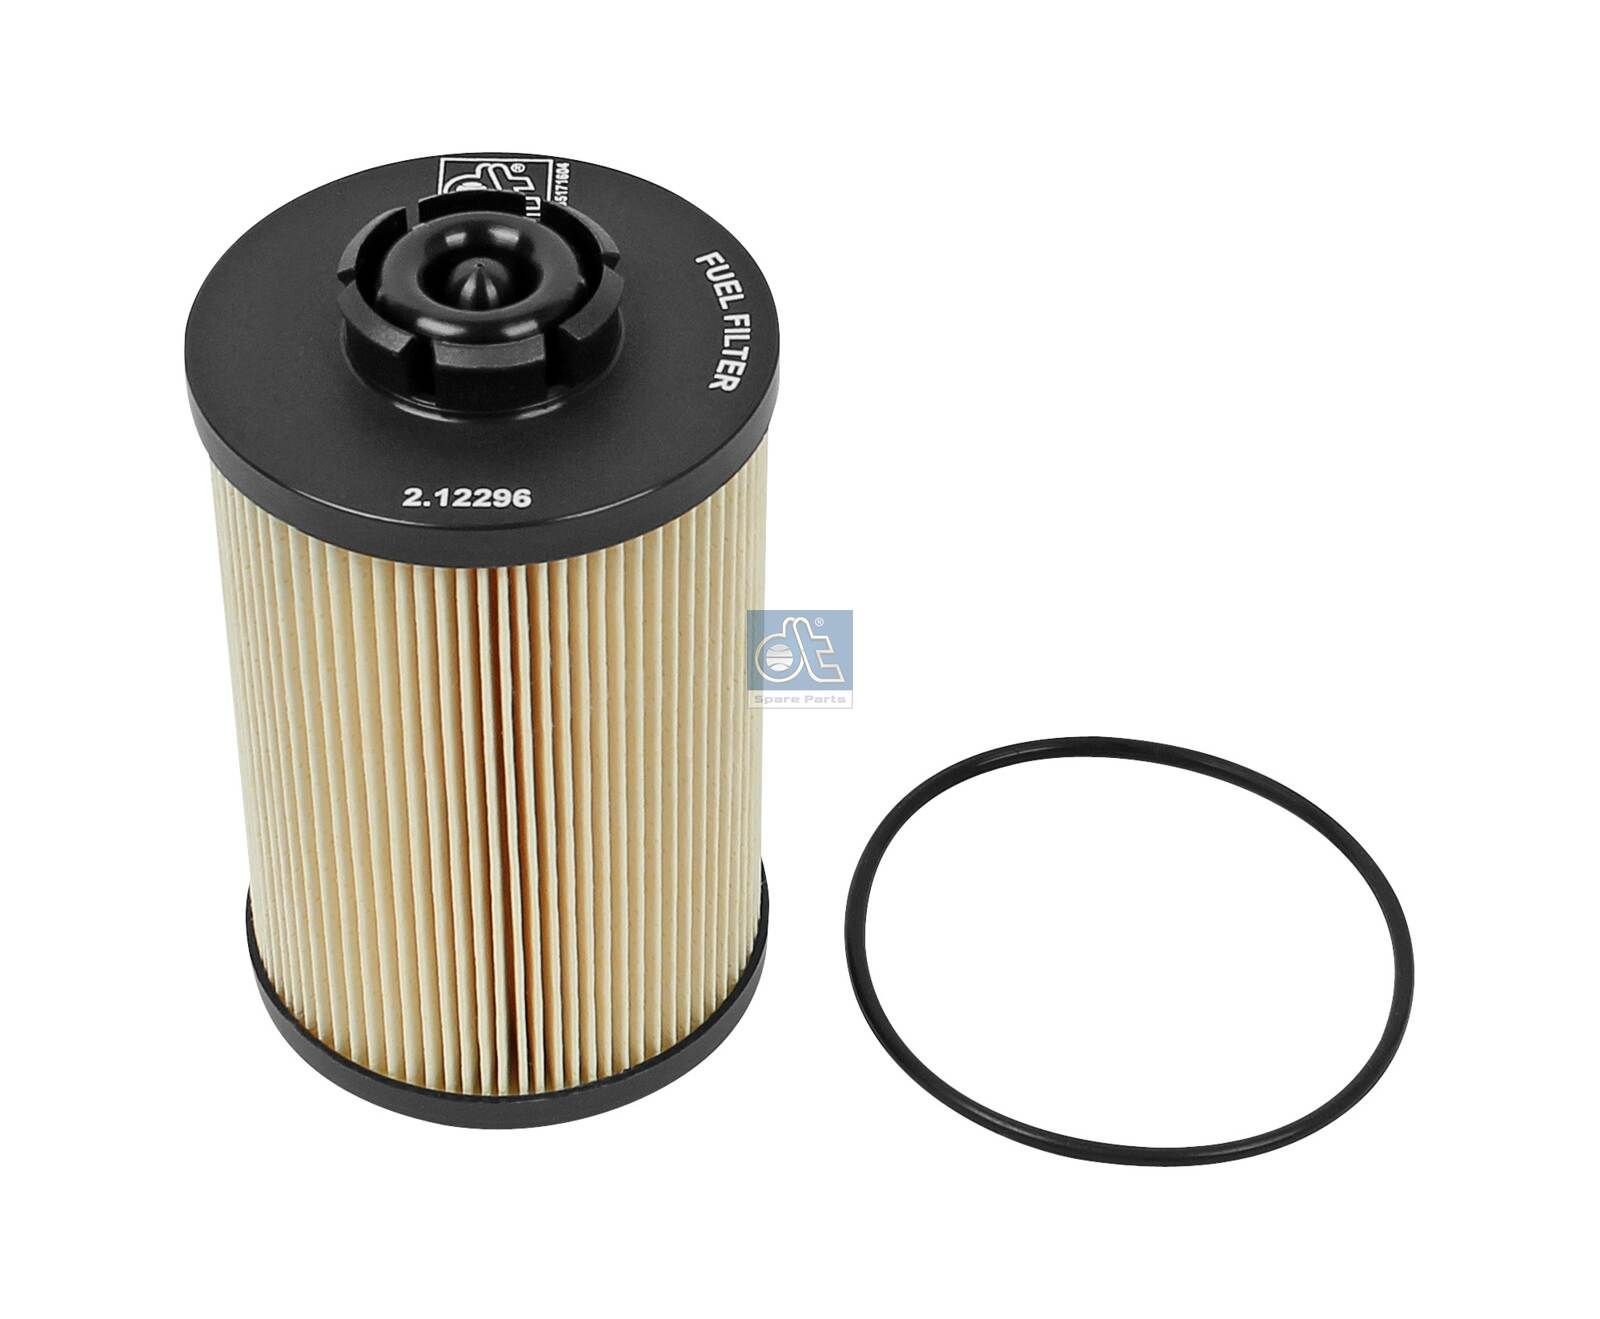 PU 1058X DT Spare Parts 2.12296 Fuel filter 04901031